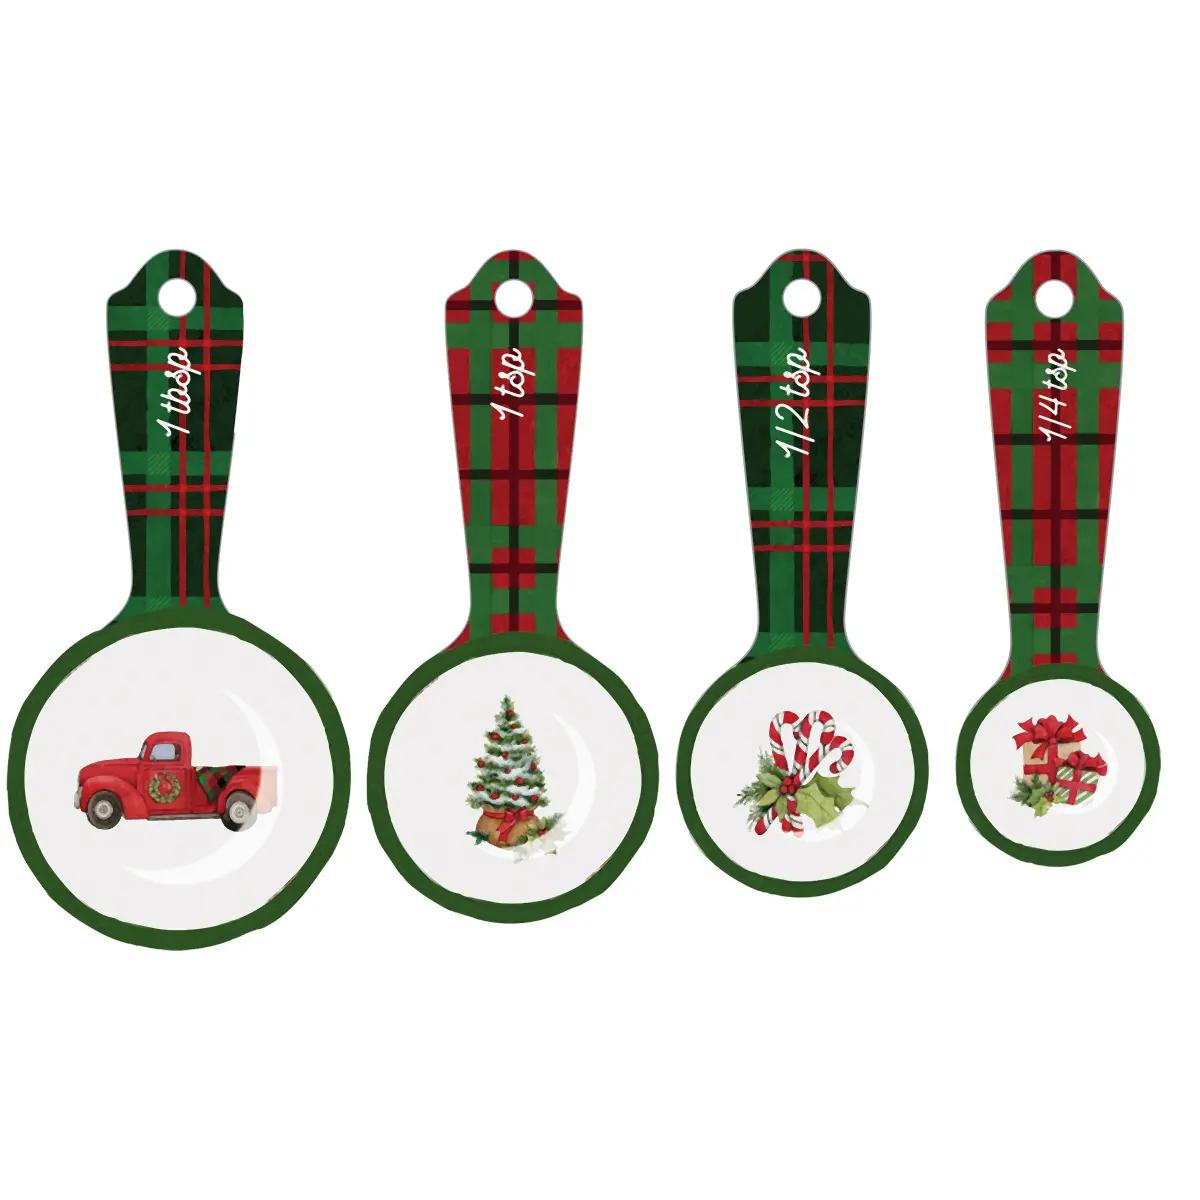  Christmas Wooden Measuring Cup and Spoon Set with Festive  Designs Stackable Measure Cups and Spoons with Comfortable Grips Essential  Kitchen Gadgets for Cooking and Baking Gift for Christmas: Home & Kitchen